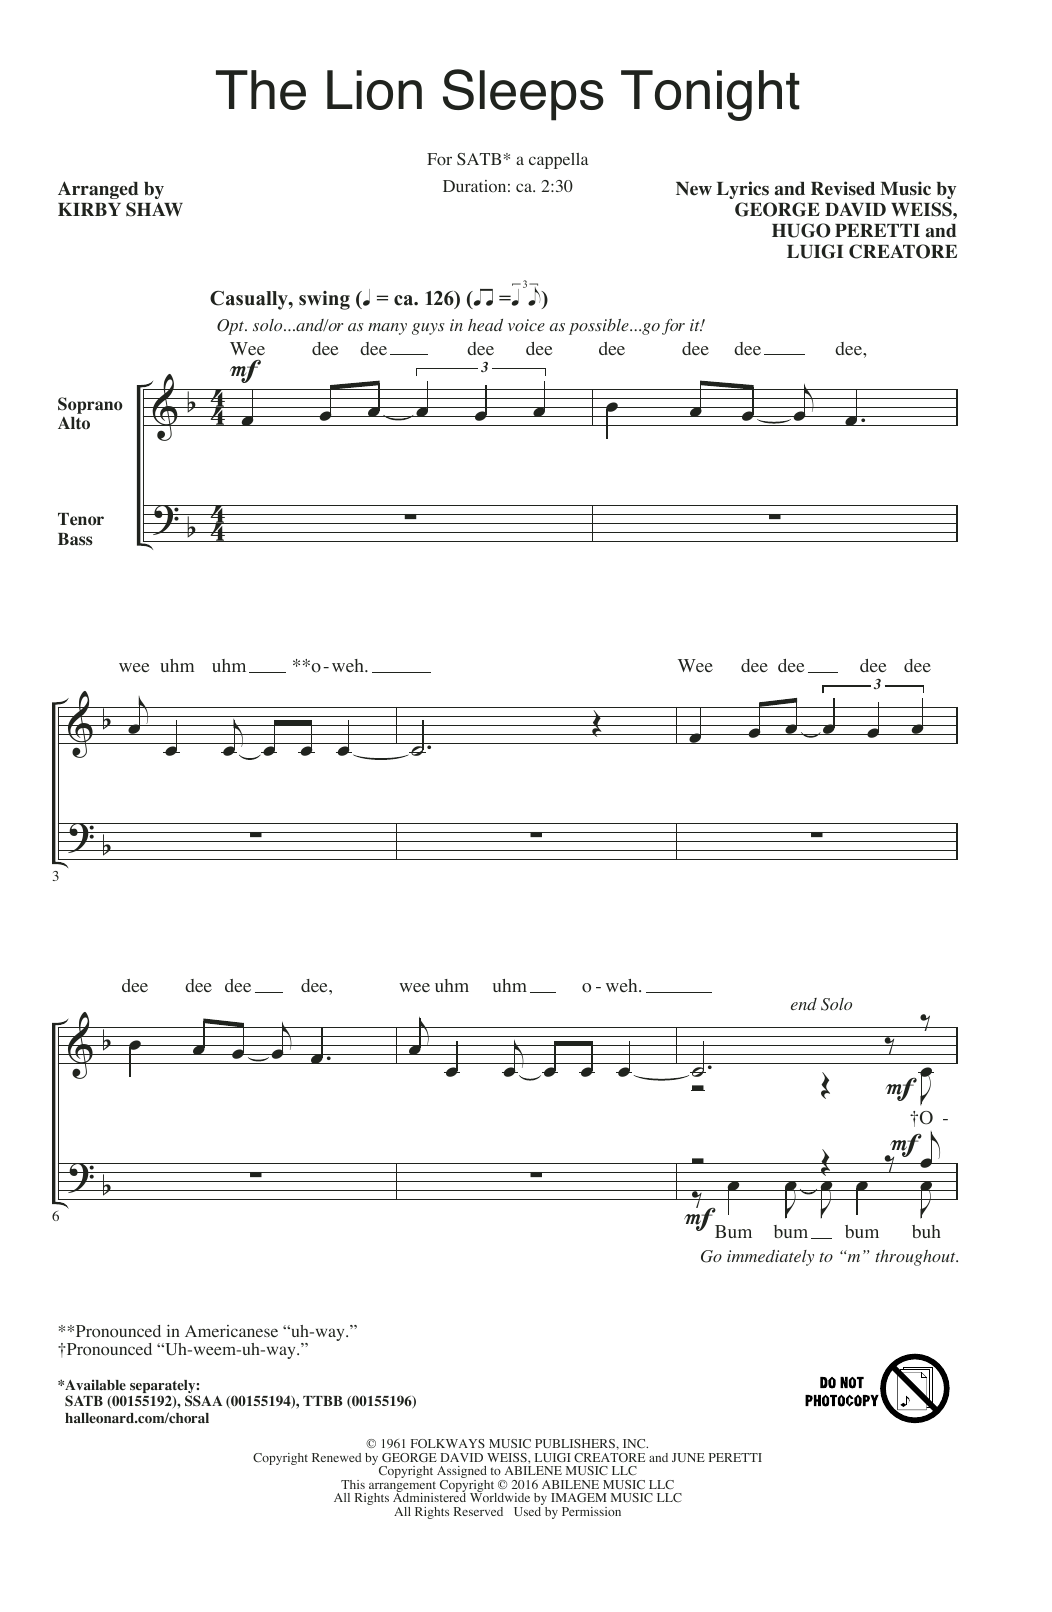 Download The Tokens The Lion Sleeps Tonight (arr. Kirby Sha Sheet Music